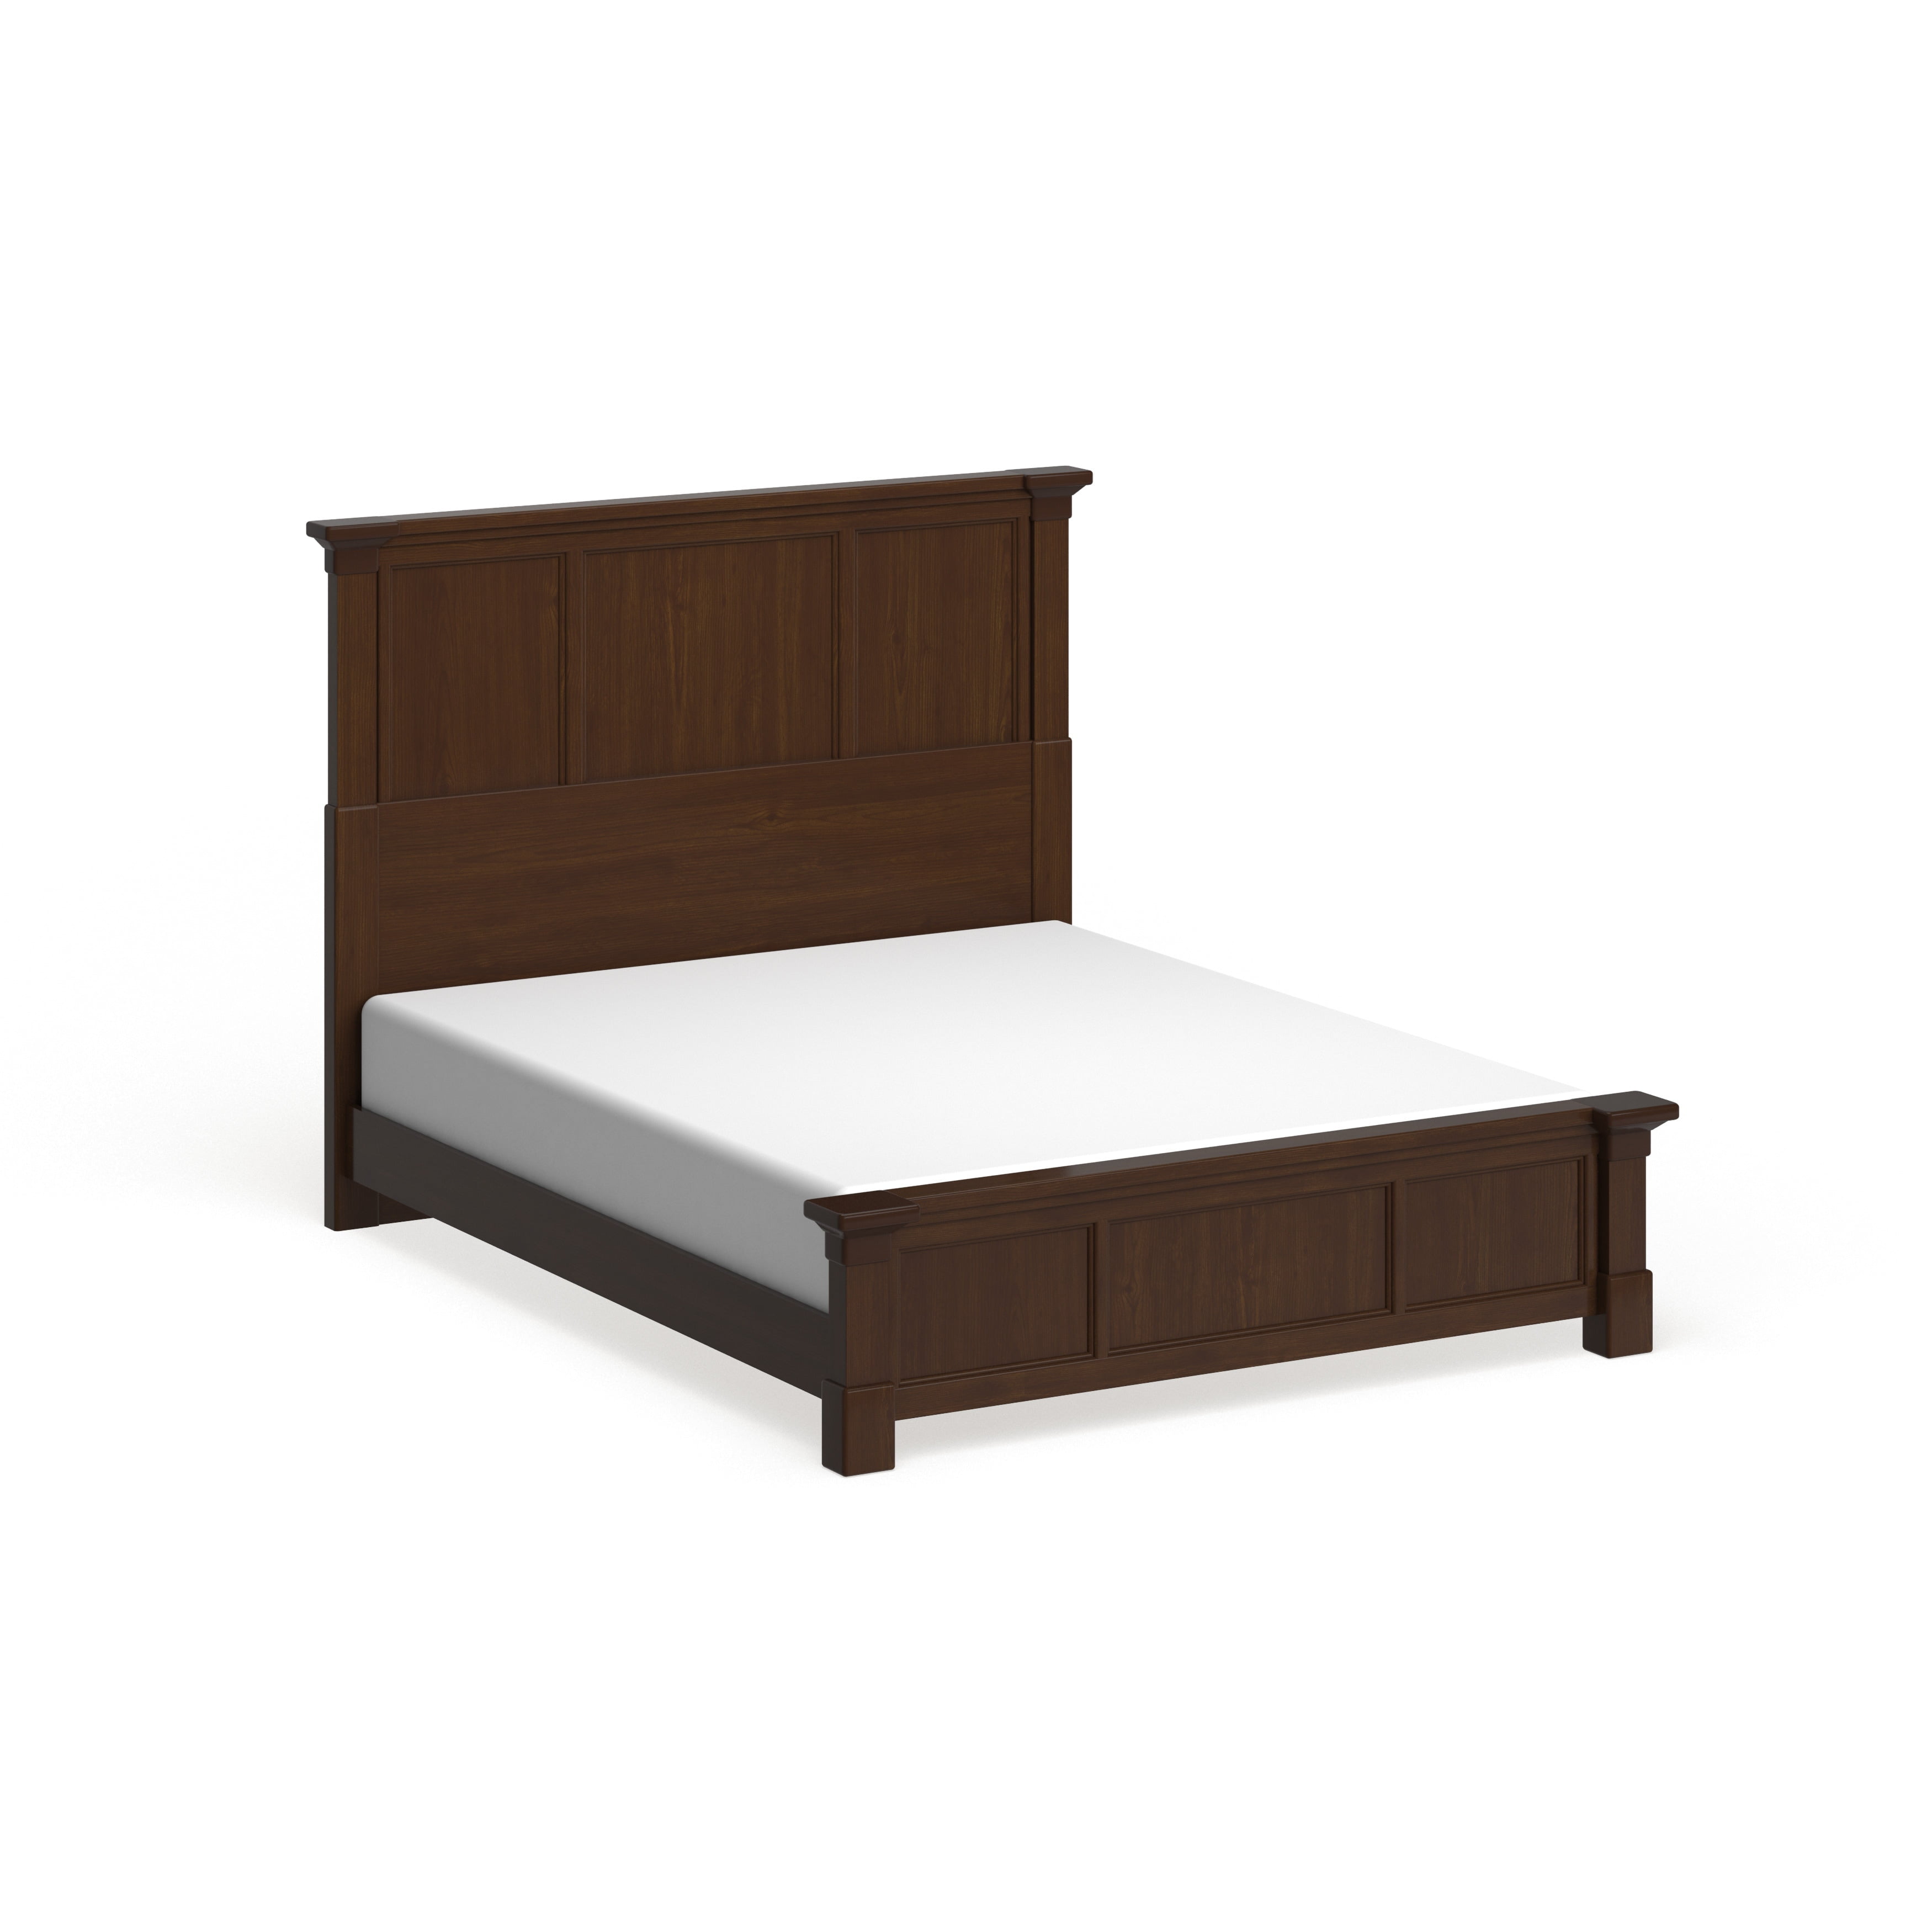 Aspen Rustic Cherry Collection King Bed, Home Styles Chesapeake King Bed